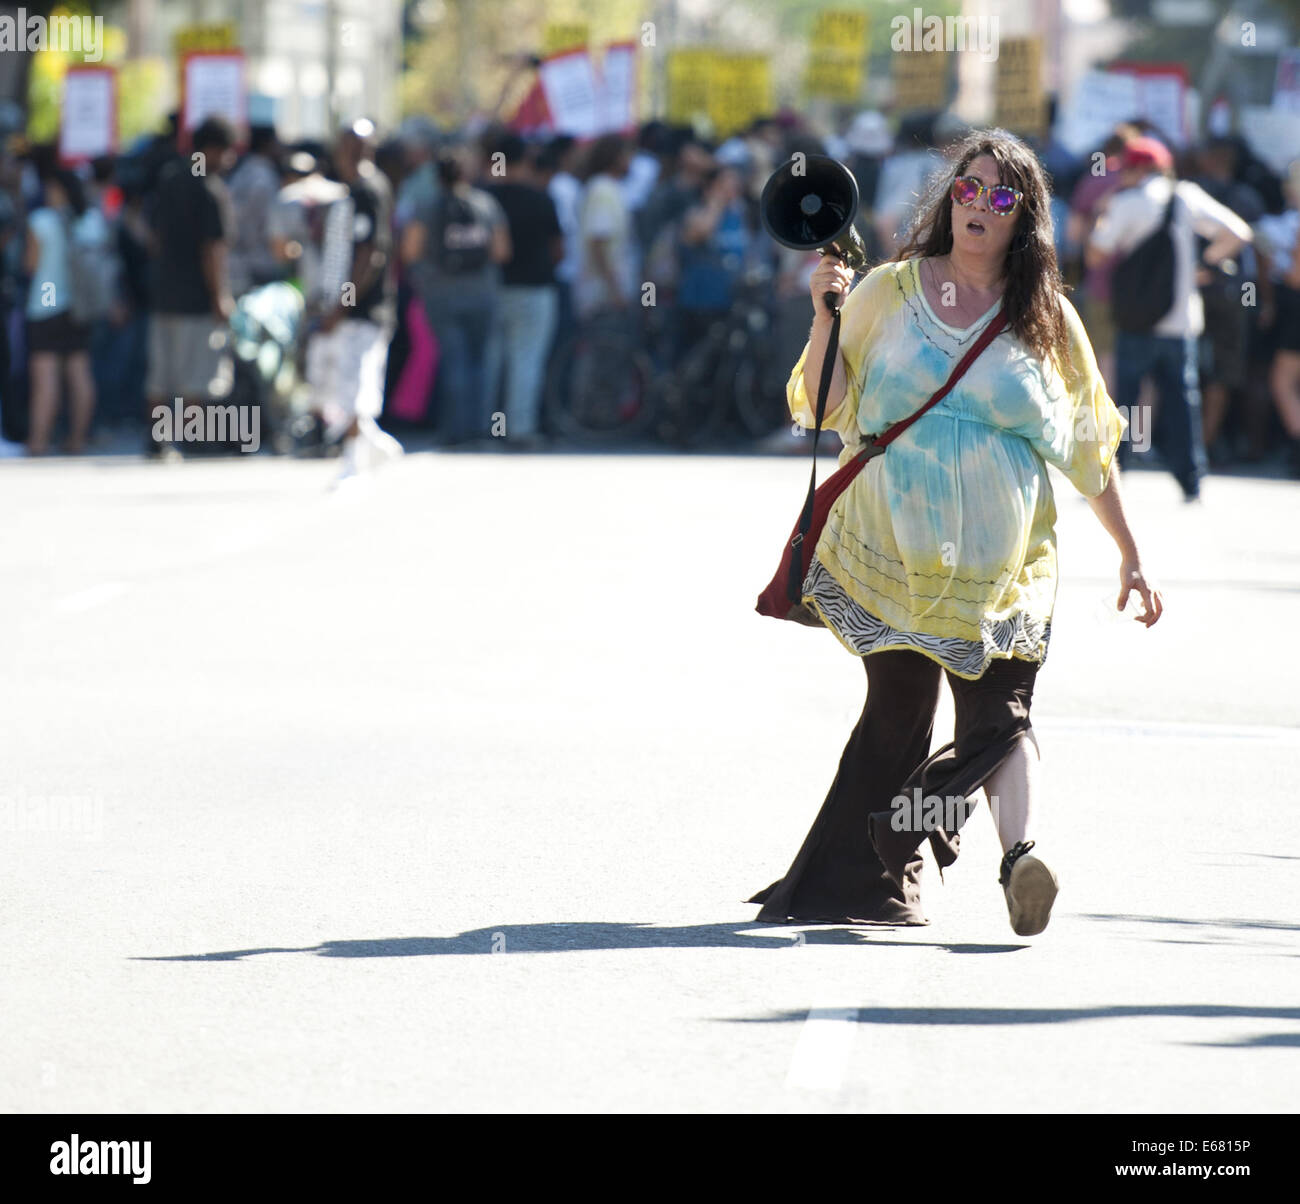 Los Angeles, California, USA. 17th Aug, 2014. A protest leader makes her way down Main Street carrying a megaphone in the Los Angeles downtown on Sunday afternoon.----About 800 protesters gathered in front of the Los Angeles Police Department in the downtown on Sunday afternoon to protest the officer involved shooting of a Ezell Ford in South Central Los Angeles last week as well as to show support the residents of Ferguson, Missouri, in their protests against the police there. The assembled crowd displayed placards and signs with slogans against the police, joining together to chant their s Stock Photo